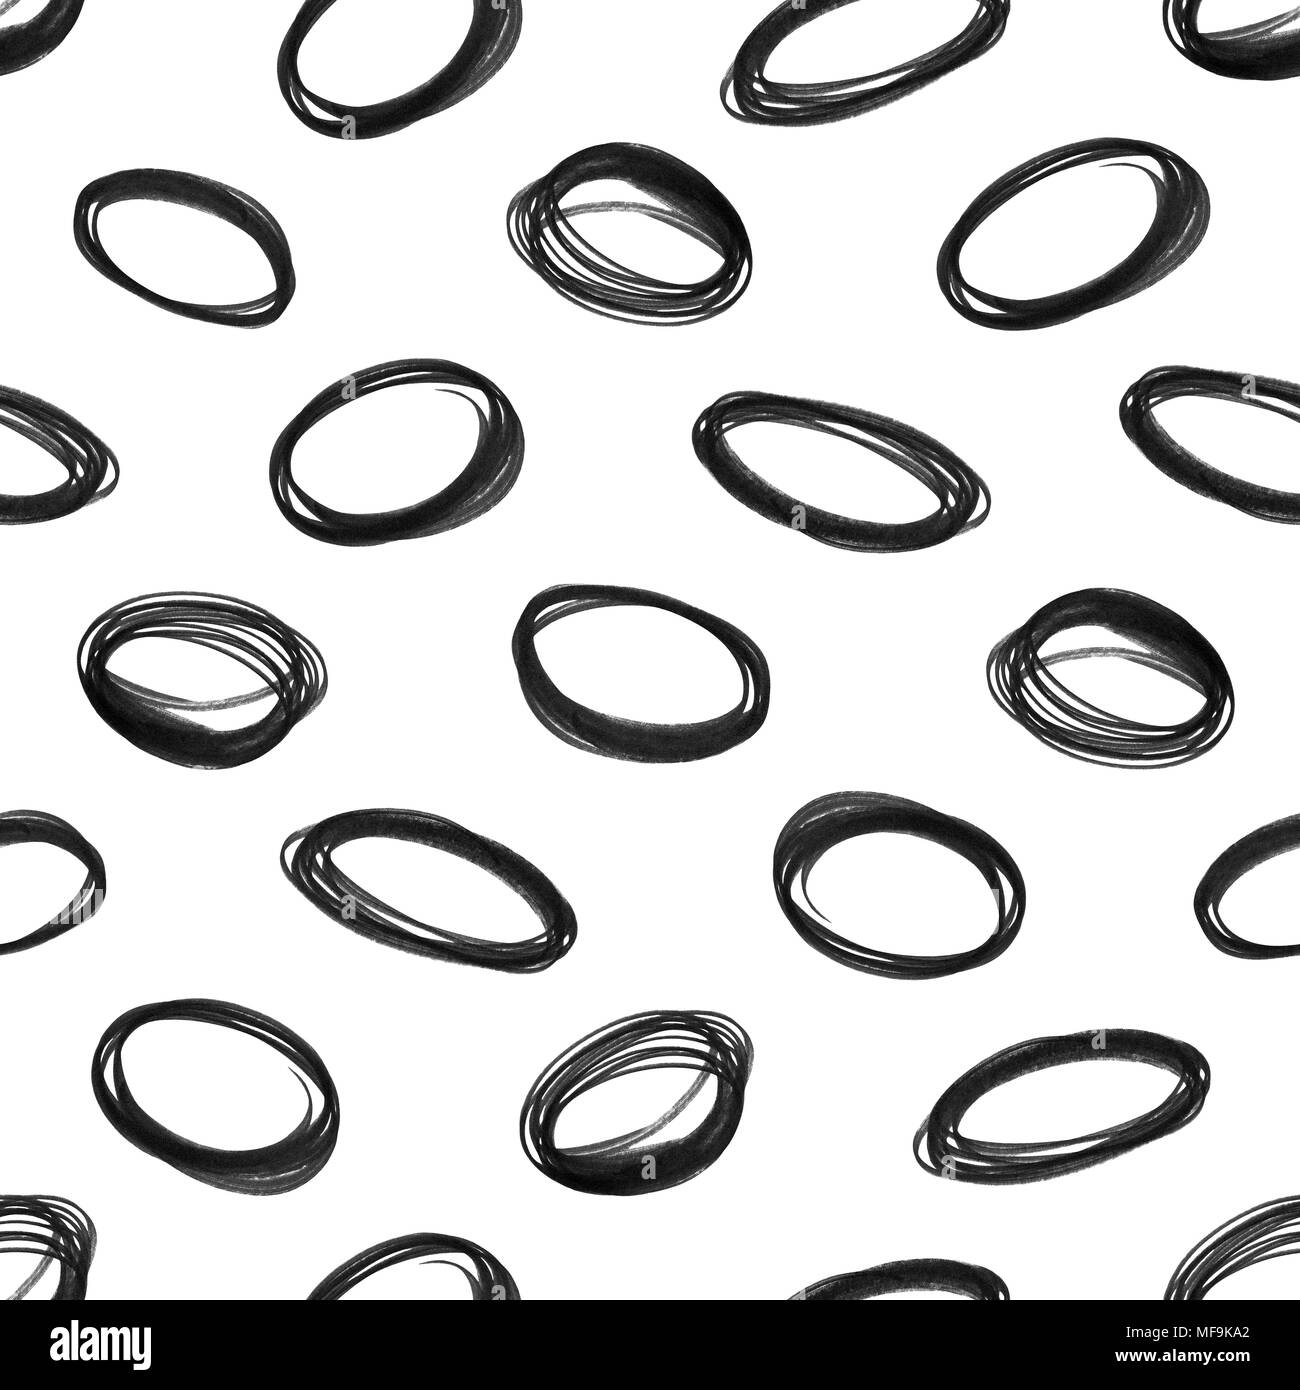 Seamless decorative pattern with hand drawn oval shapes. Stock Photo